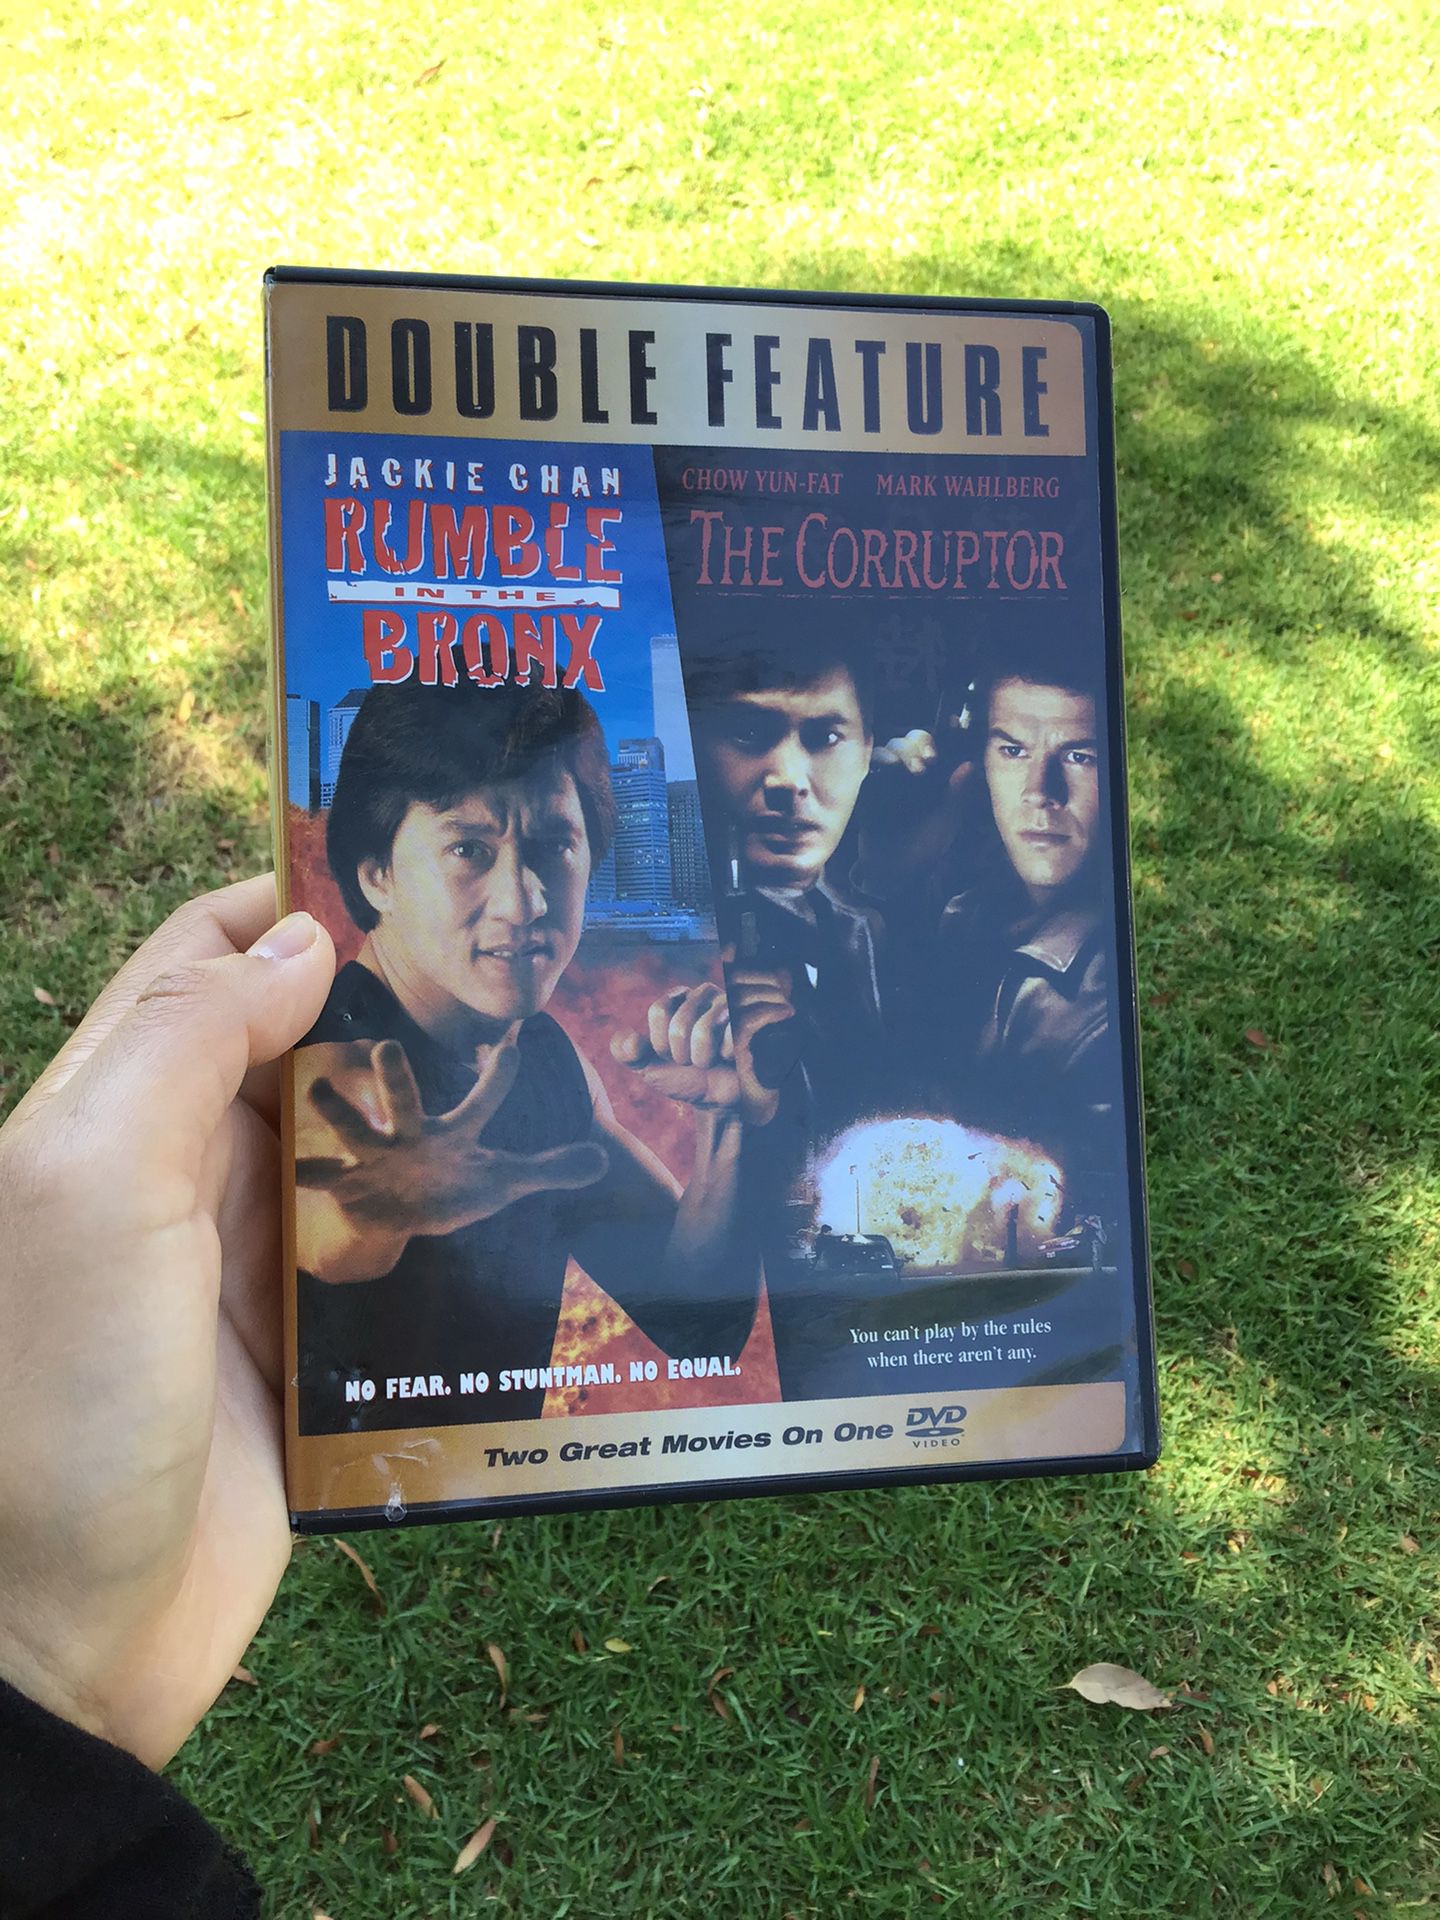 Jackie Chan Mark Wahlberg Movies Rumble In the Bronx The Corruptor Movie DVD Player Action Martial Arts 